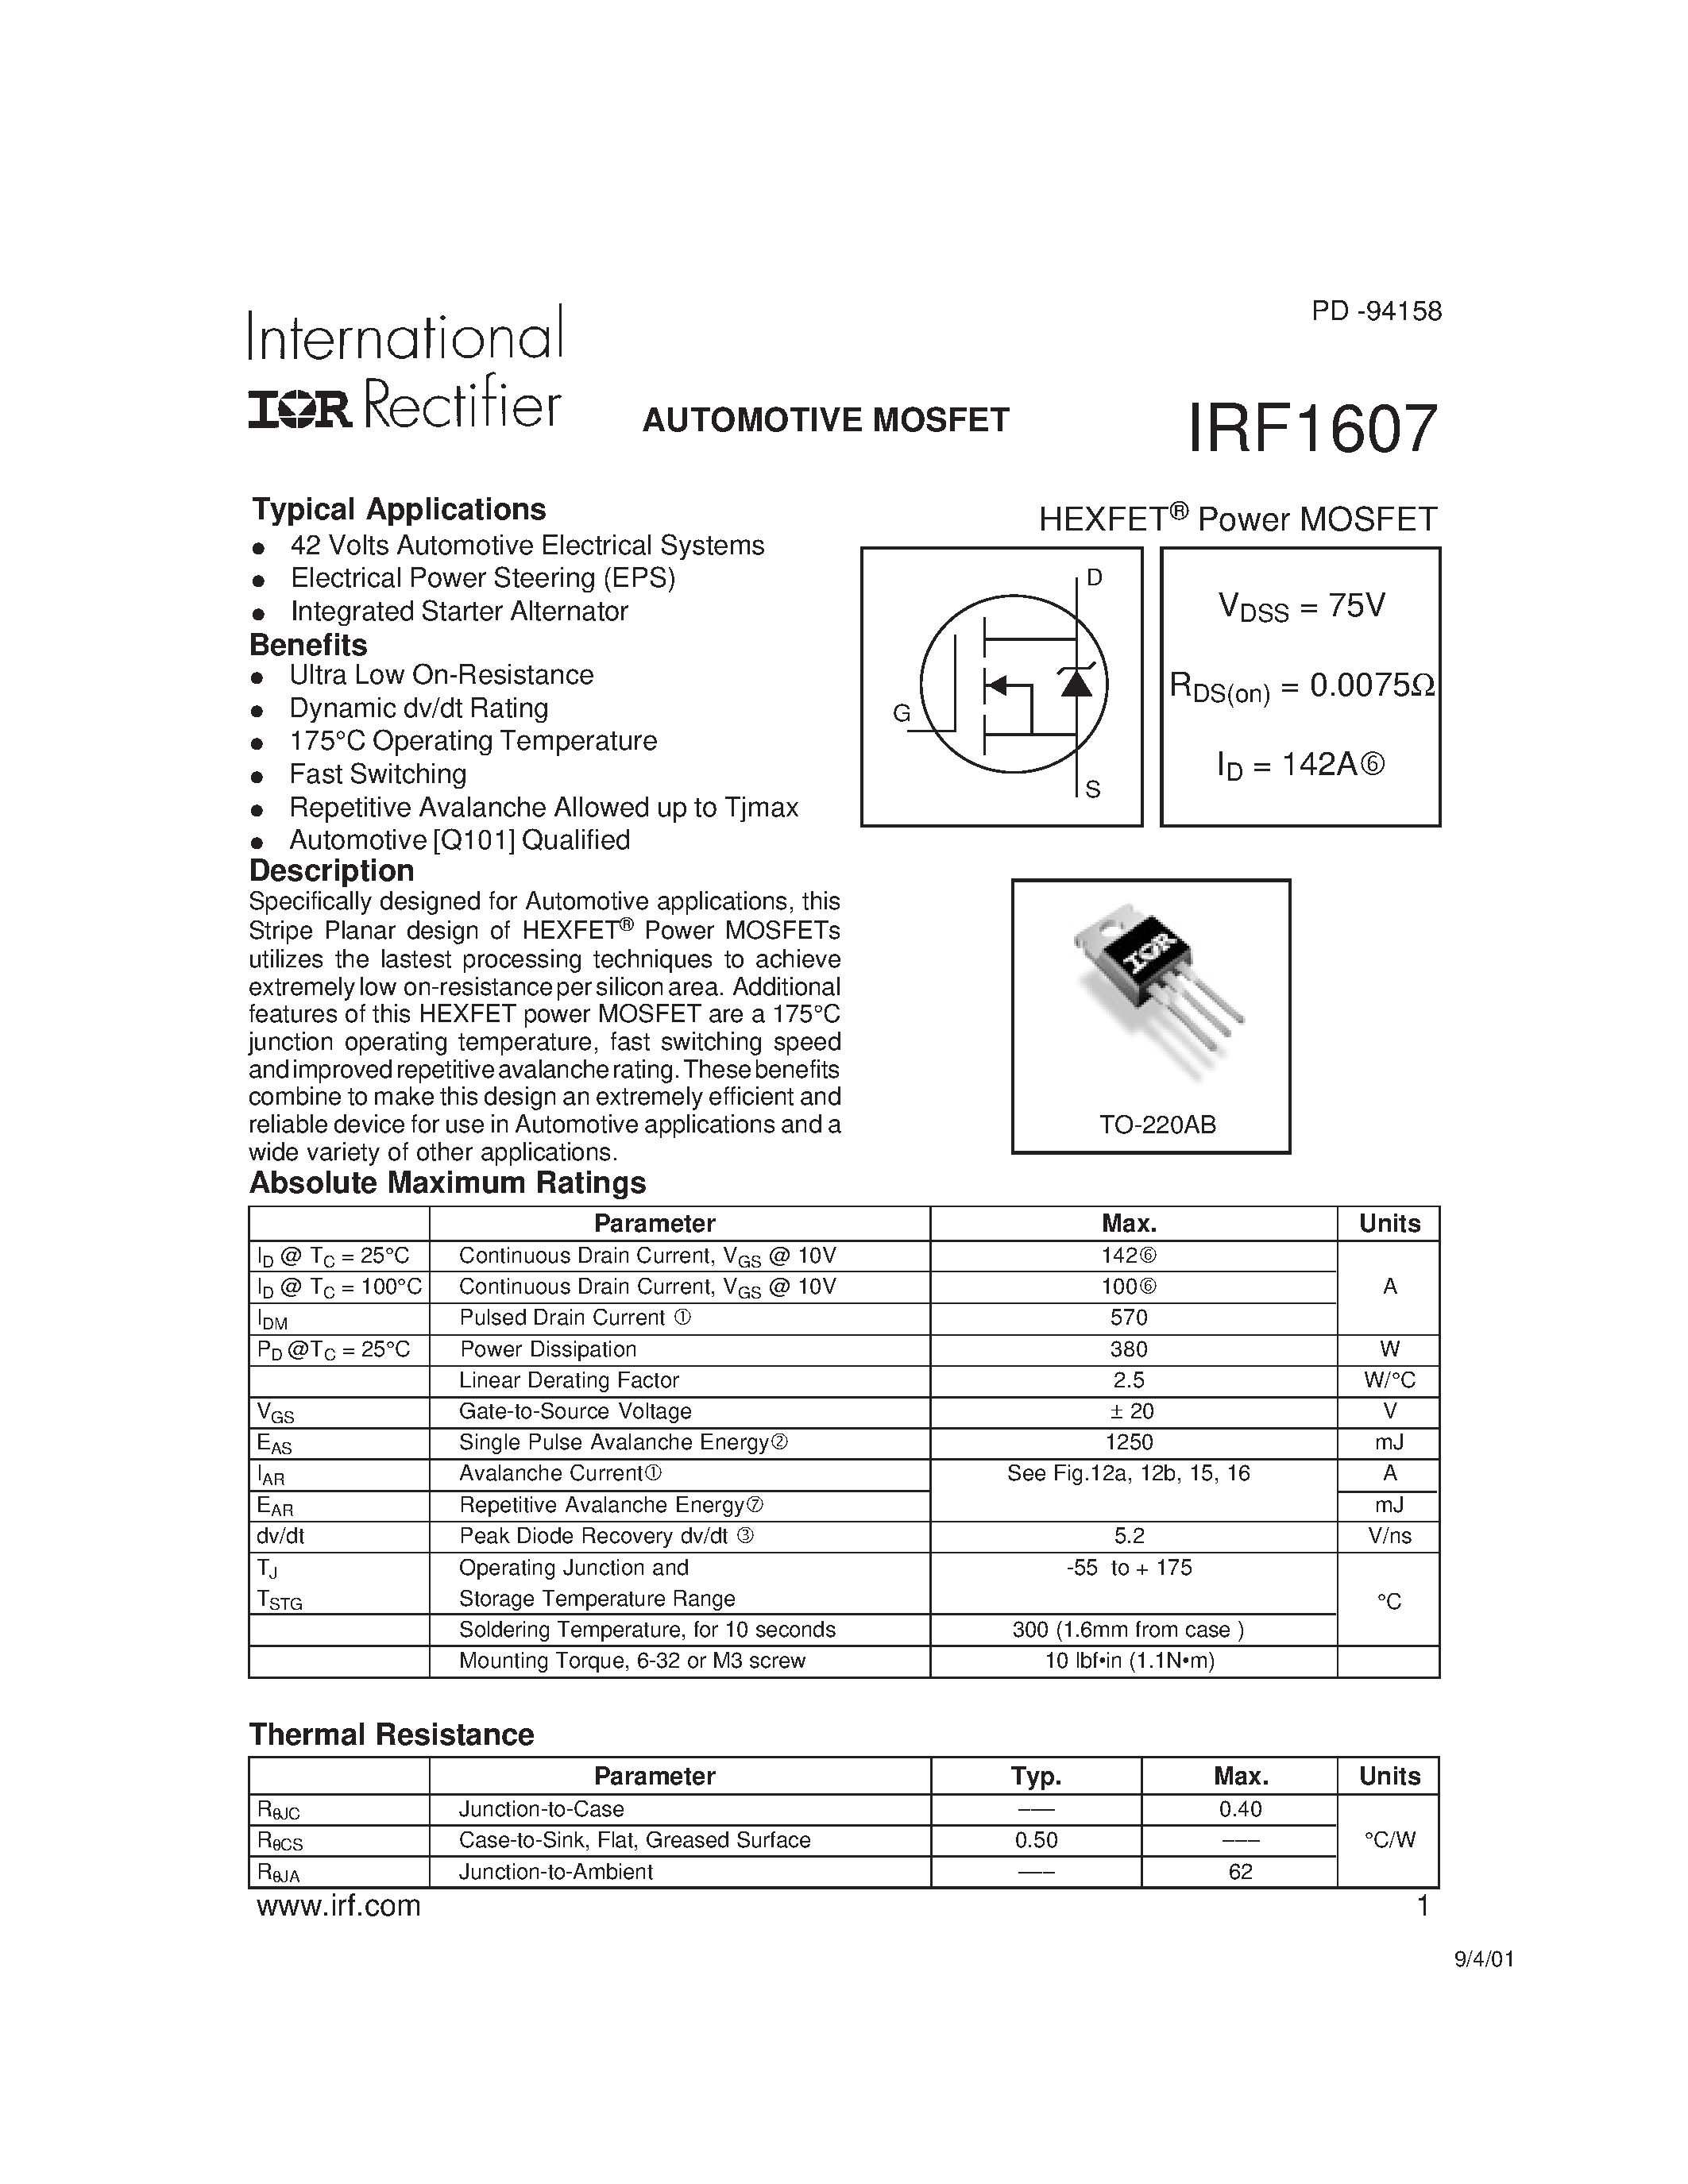 Даташит IRF1607 - Power MOSFET(Vdss=75V/ Rds(on)=0.0075ohm/ Id=142A) страница 1